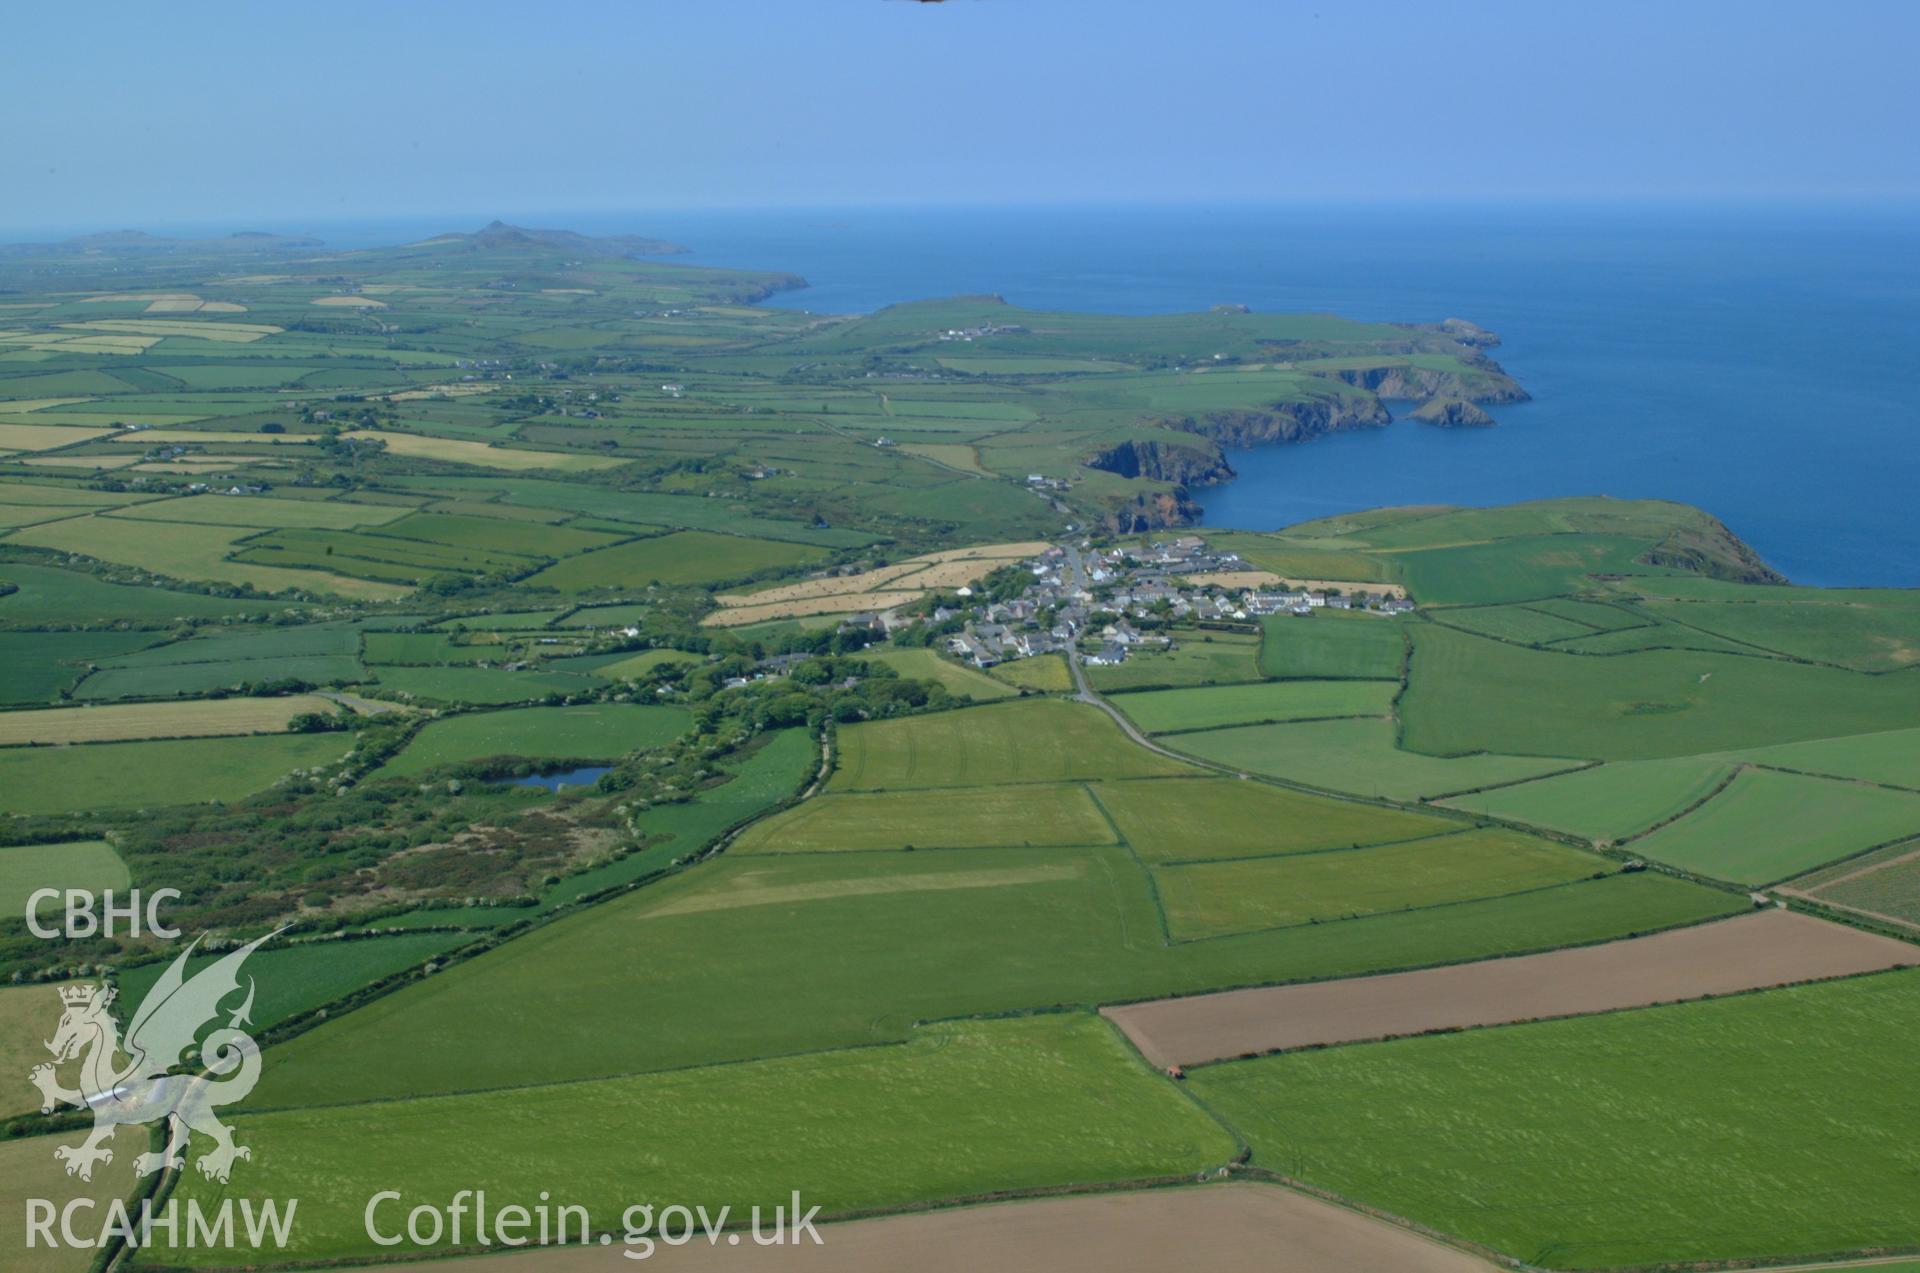 RCAHMW colour oblique aerial photograph of Trefin Chapel (Welsh Calvinistic Methodist) and Trefin Village in landscape view from the east. Taken on 25 May 2004 by Toby Driver